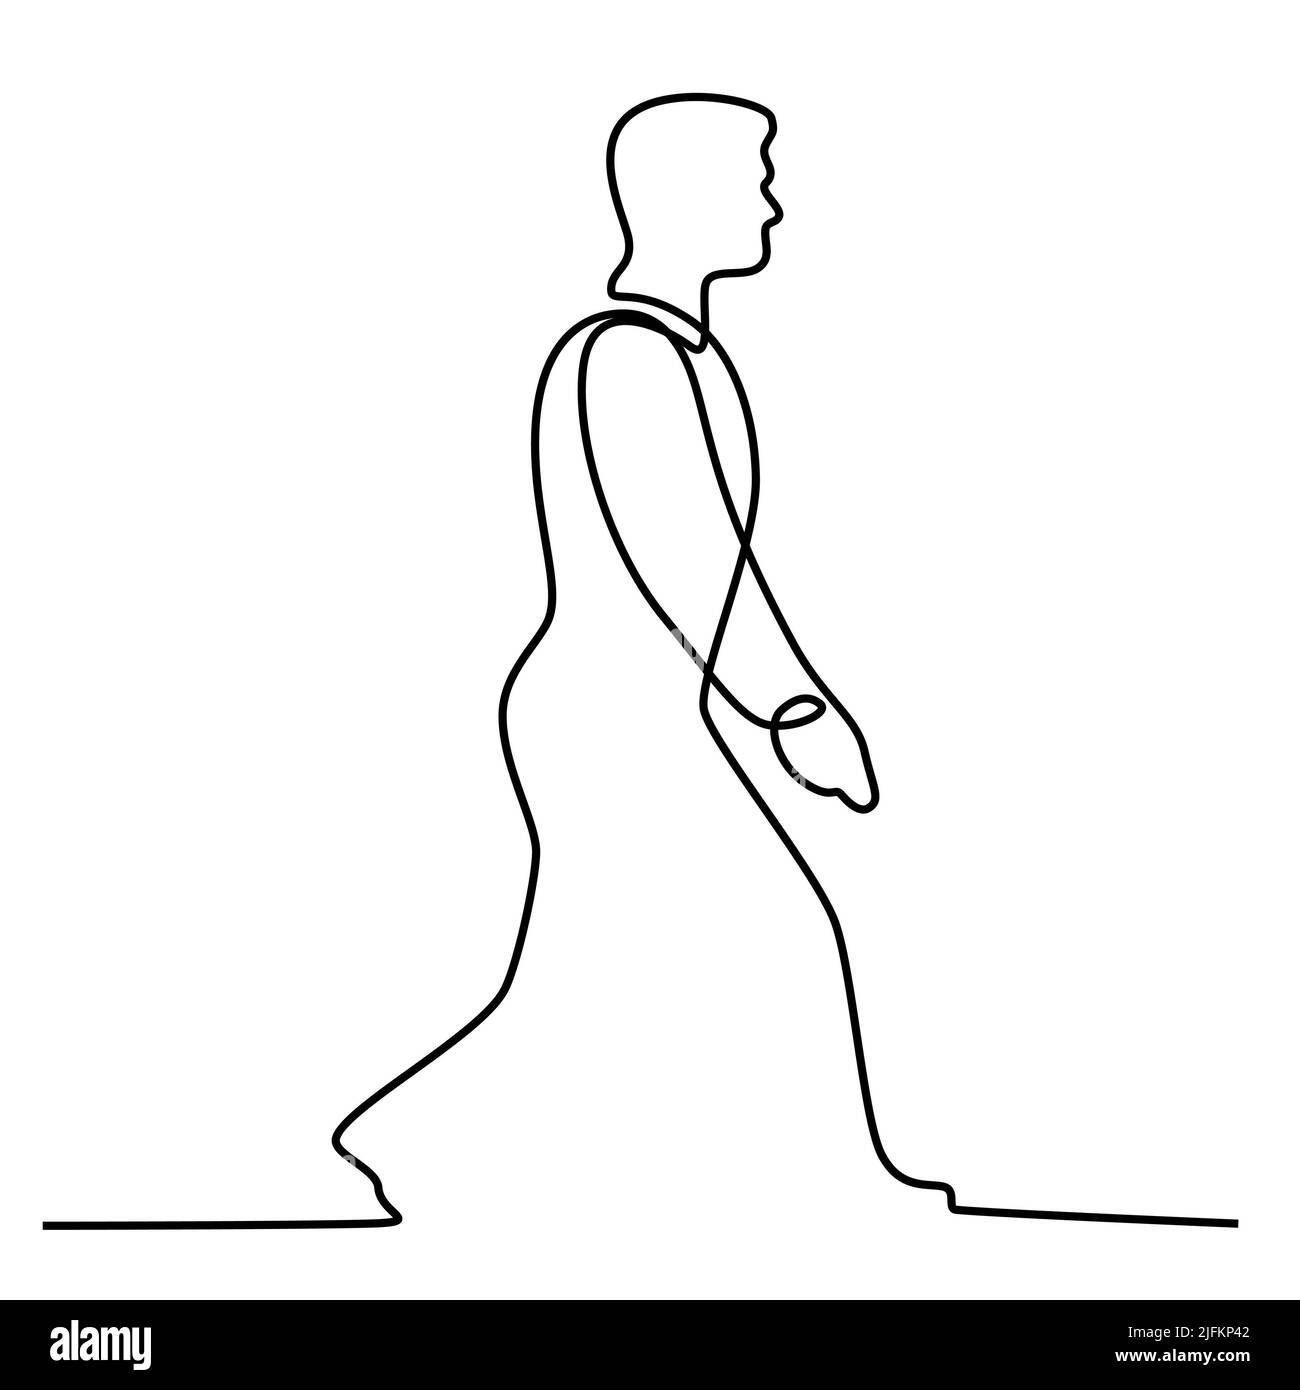 Continuous line illustration of male businessman man walking viewed from side done in black and white monoline style. Stock Photo